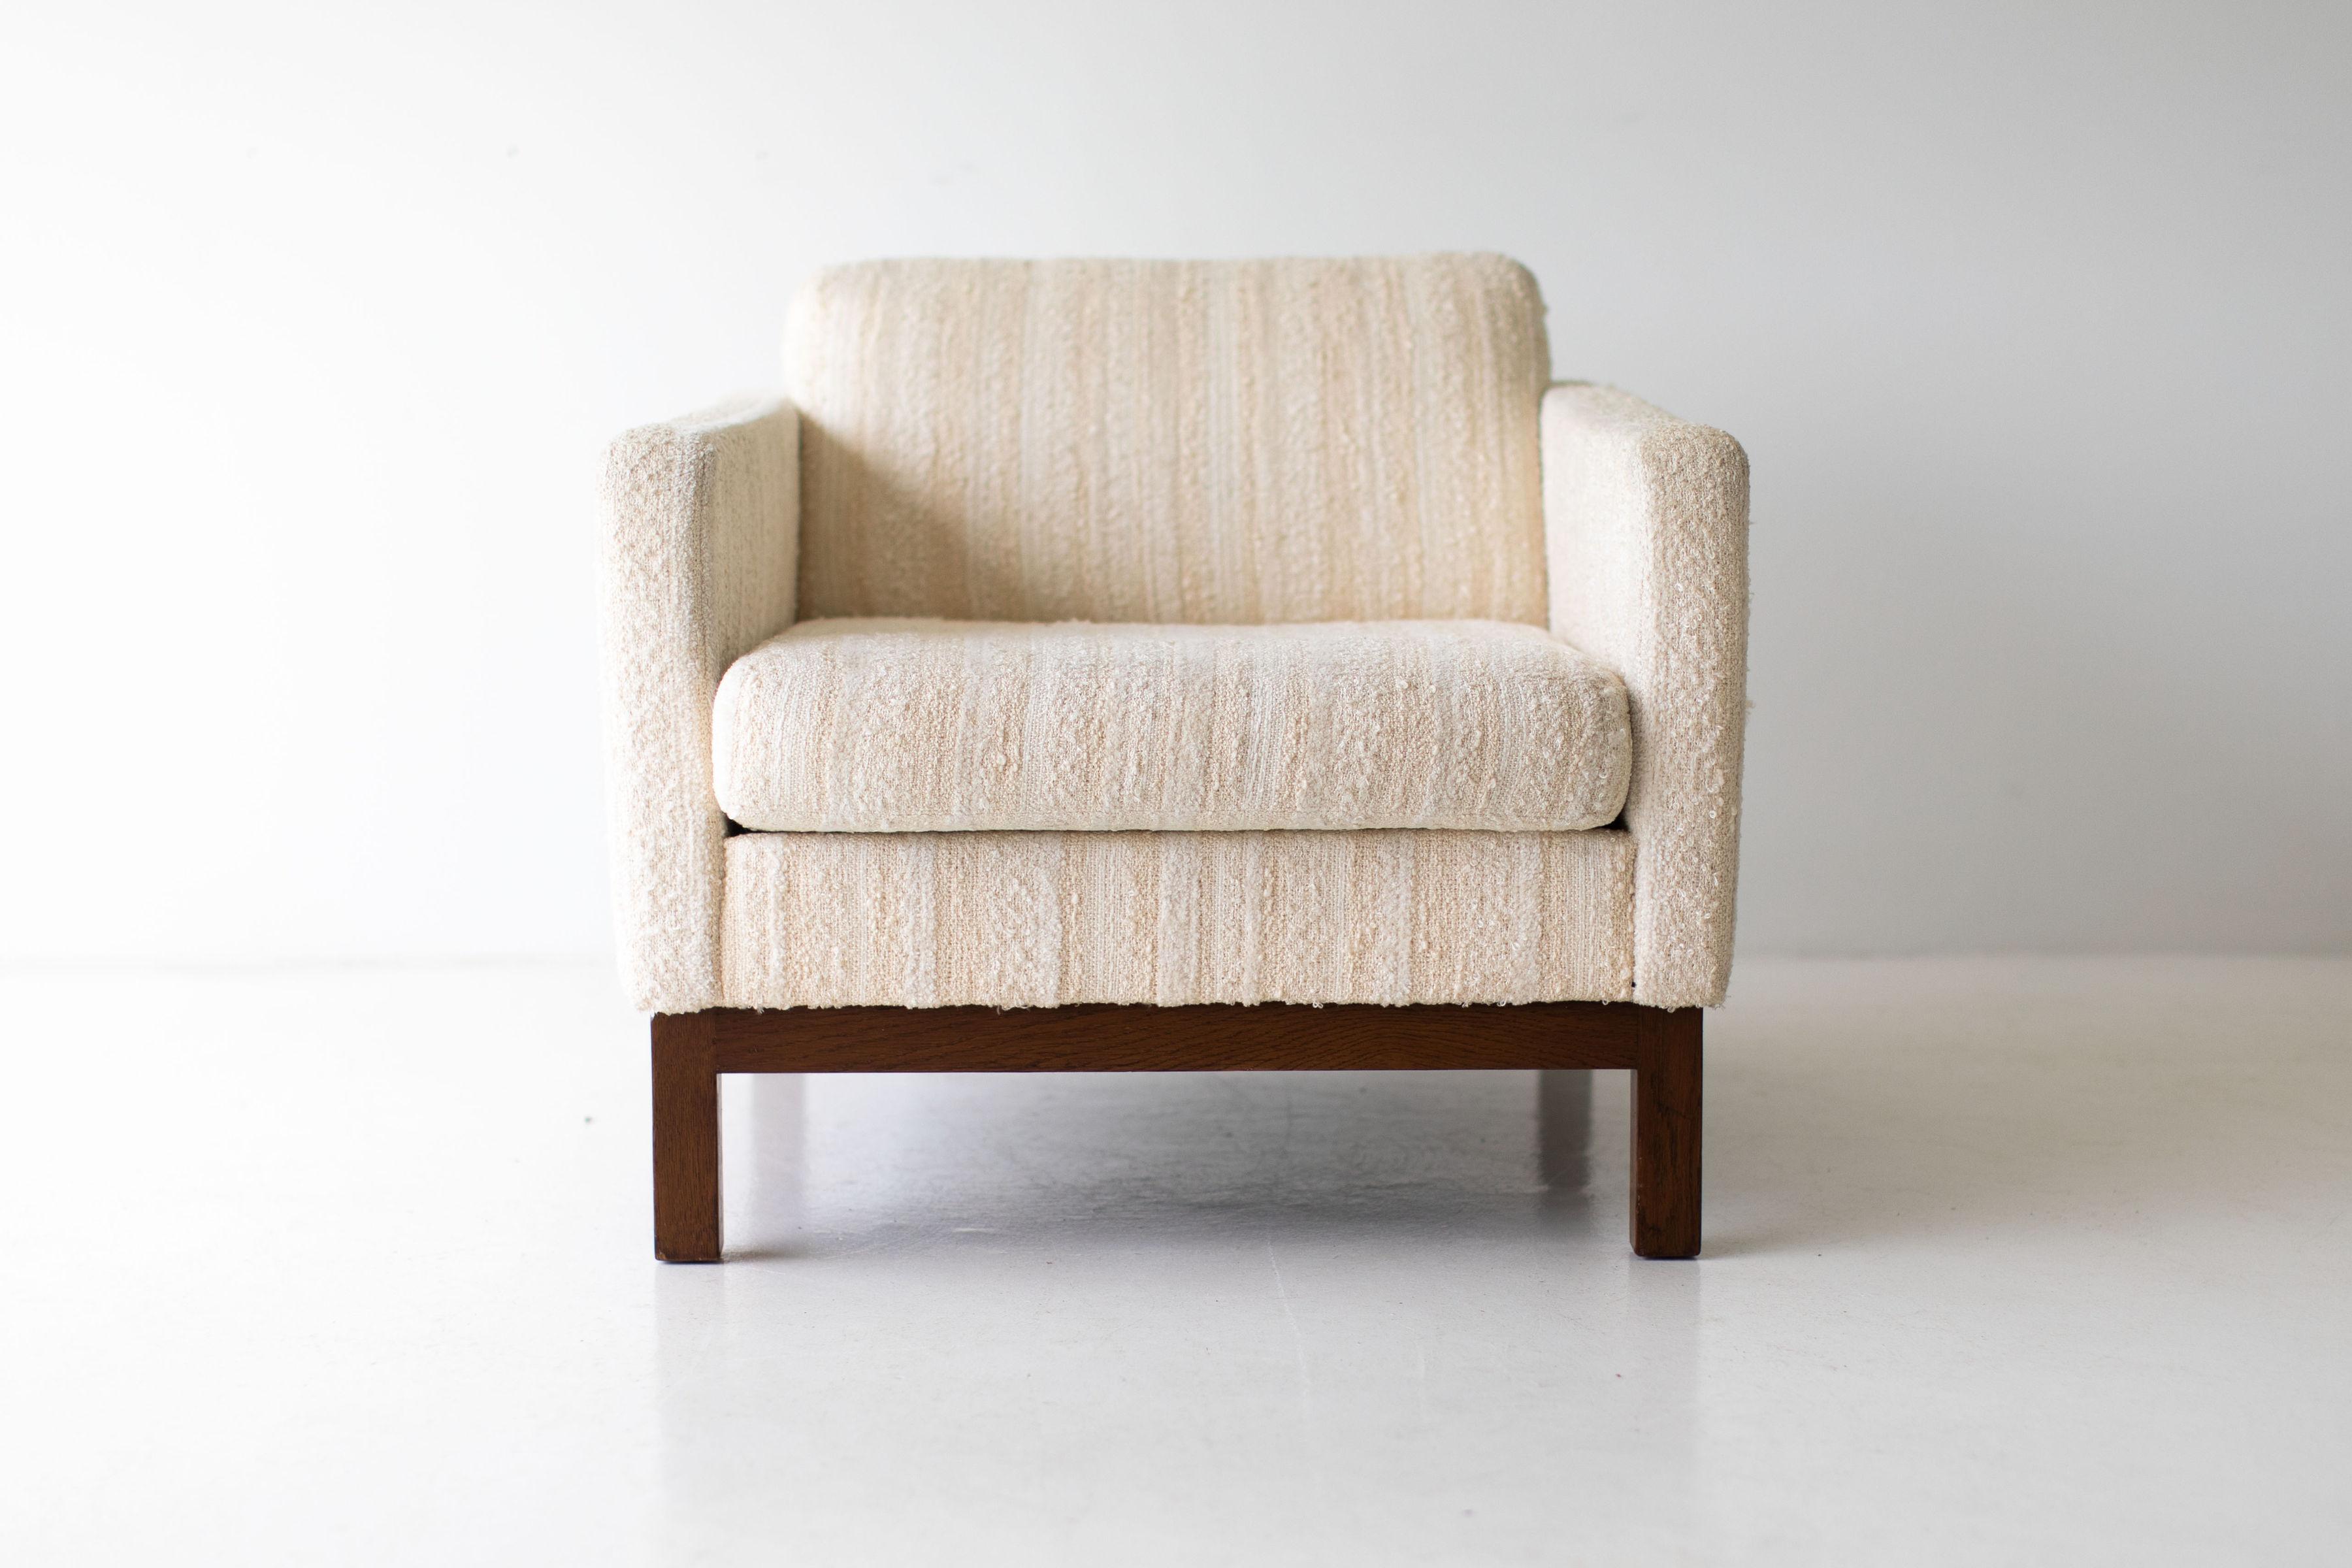 Designer: Milo Baughman

Manufacturer: James Inc.
Period and model: Mid-Century Modern
Specs: Wood, fabric


Condition:

This Milo Baughman lounge chair is in original used condition. The wood is in vintage original condition and shows